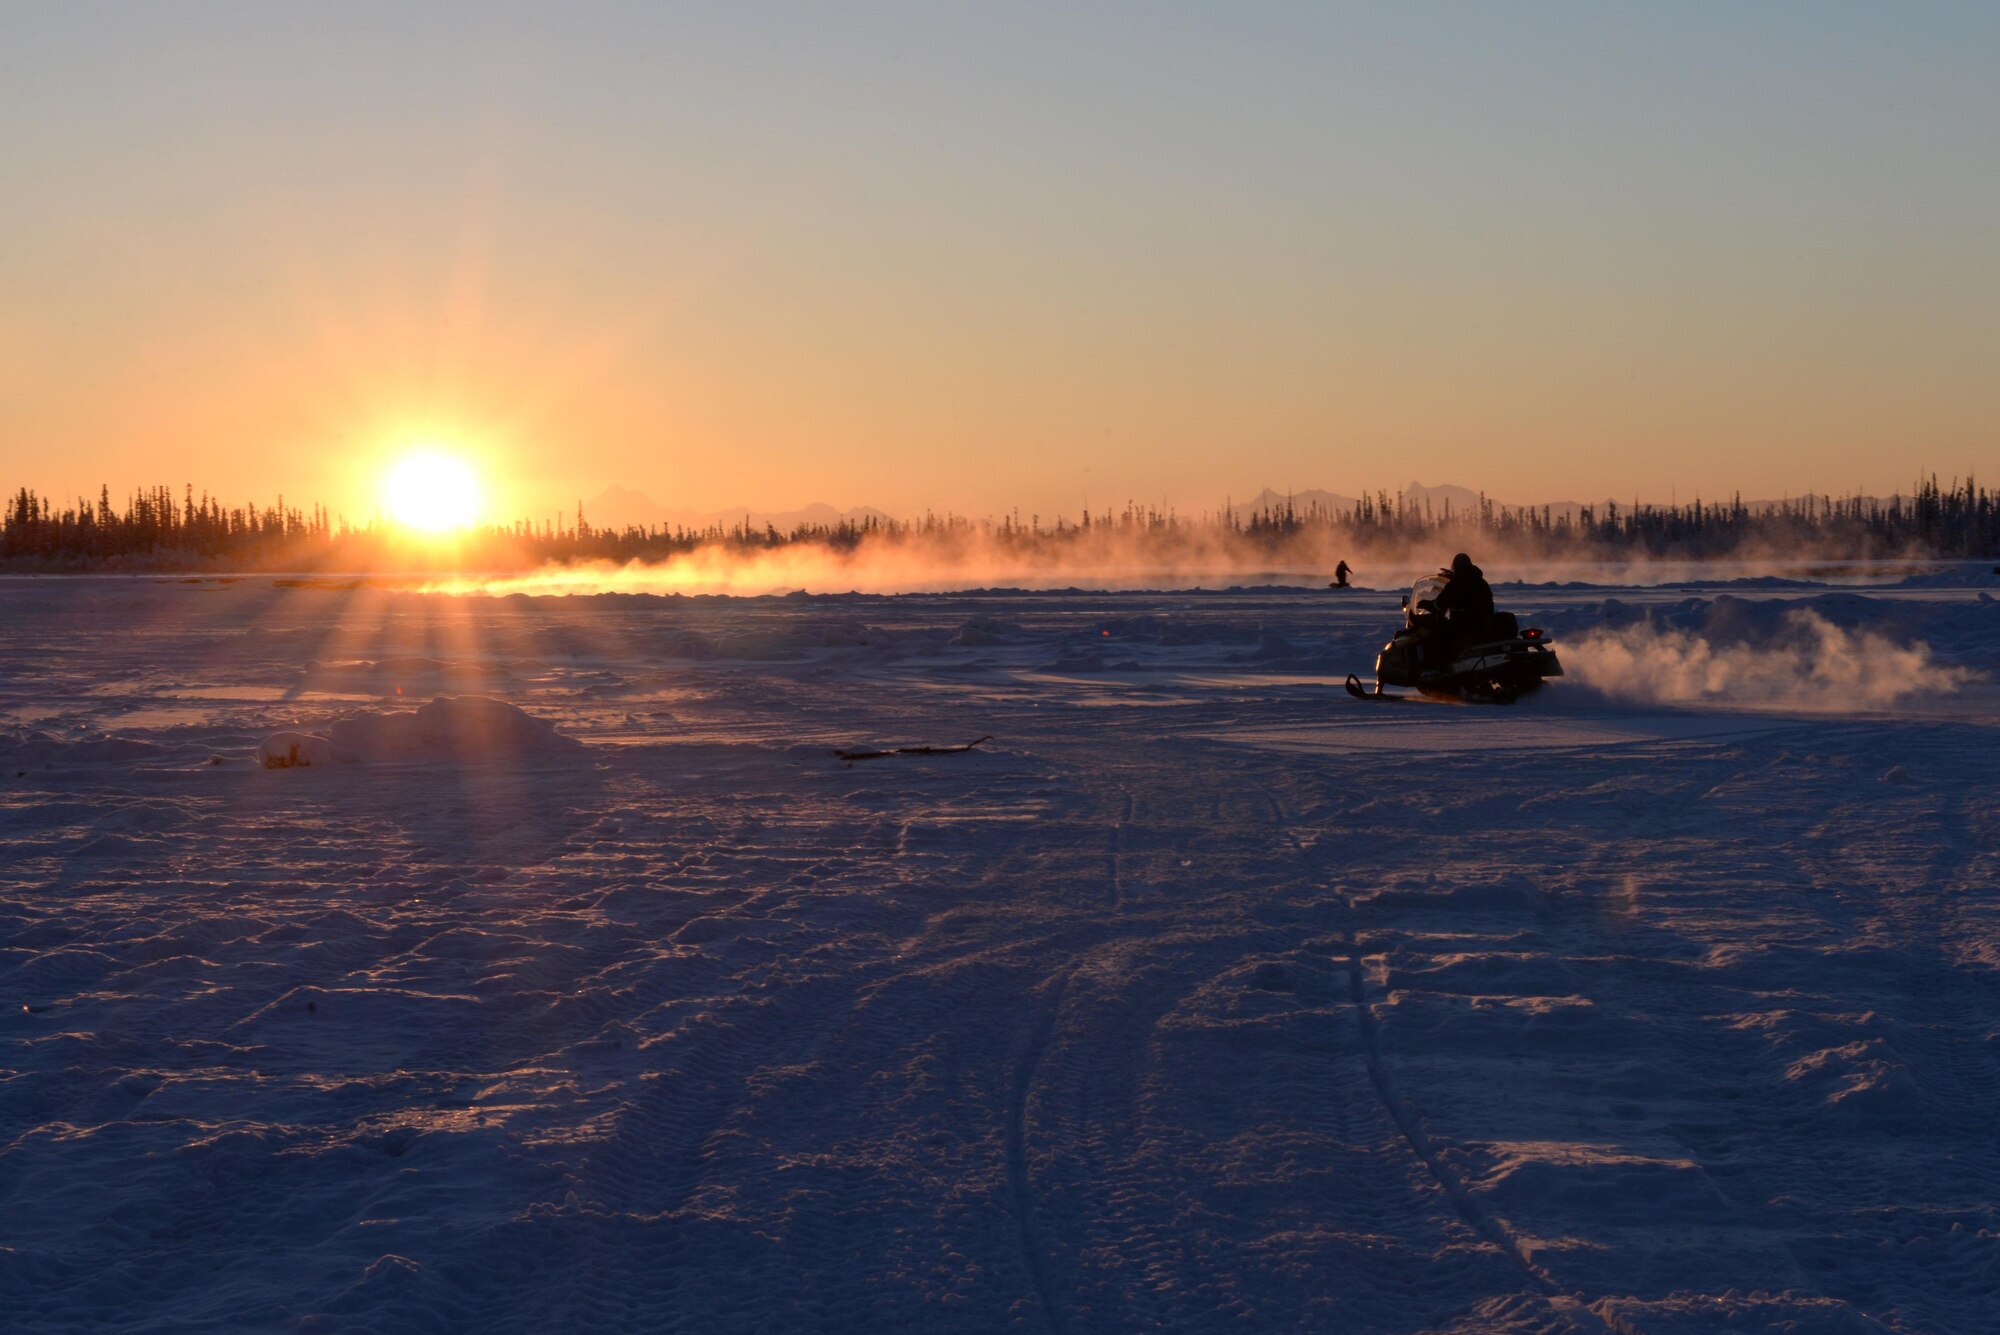 U.S. Air Force Airmen from the 354th Civil Engineer Squadron use snow machines to get across the ice bridge leading to the Blair Lakes Range Maintenance Complex Dec. 5, 2016, in Fairbanks, Alaska. The 354th CES Airmen build up the ice bridge across the Tanana River every two years to aid in the mission of the Airmen who maintain the maintenance range and equipment. (U.S. Air Force photo by Airman 1st Class Cassandra Whitman)